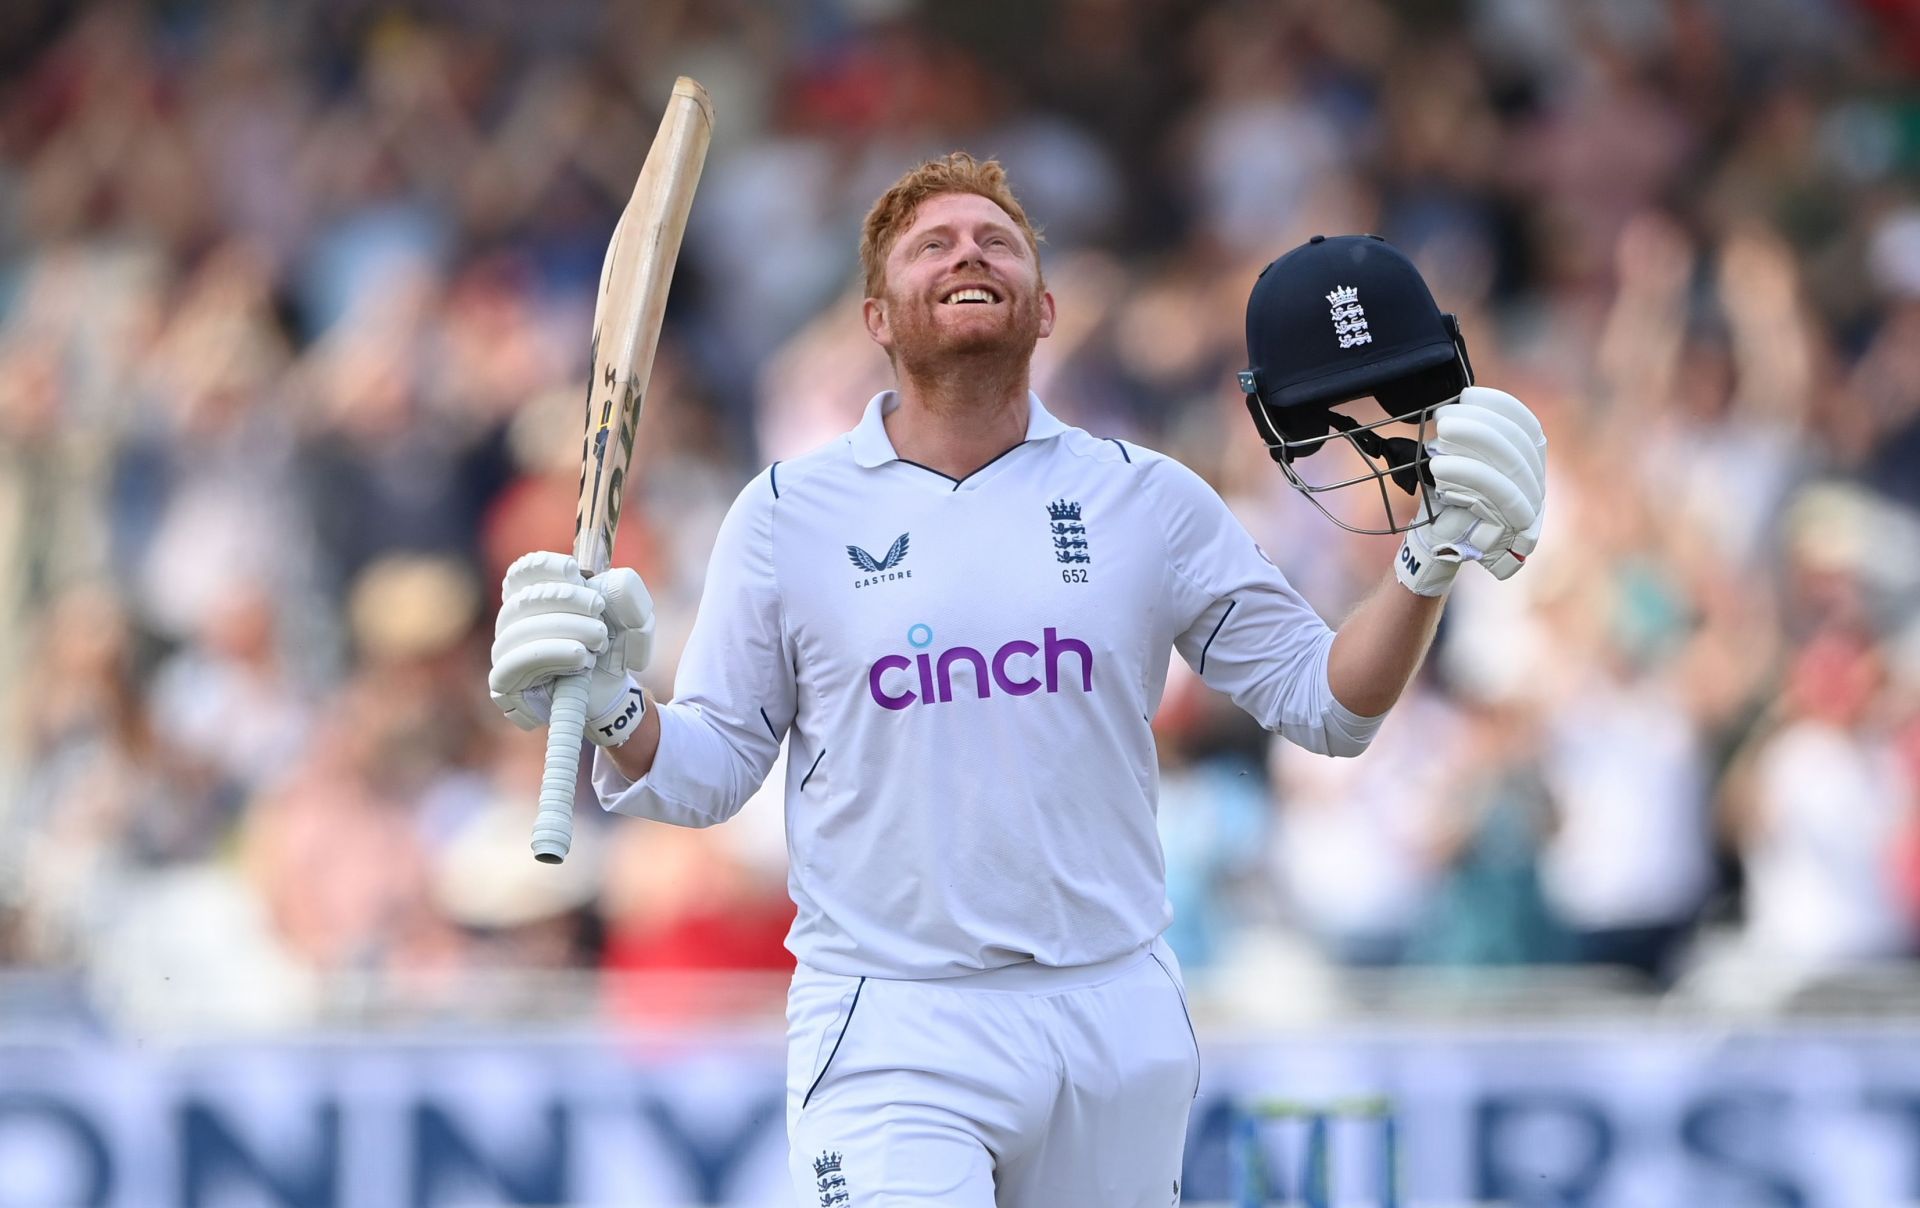 Jonny Bairstow enjoyed a great year of Test cricket